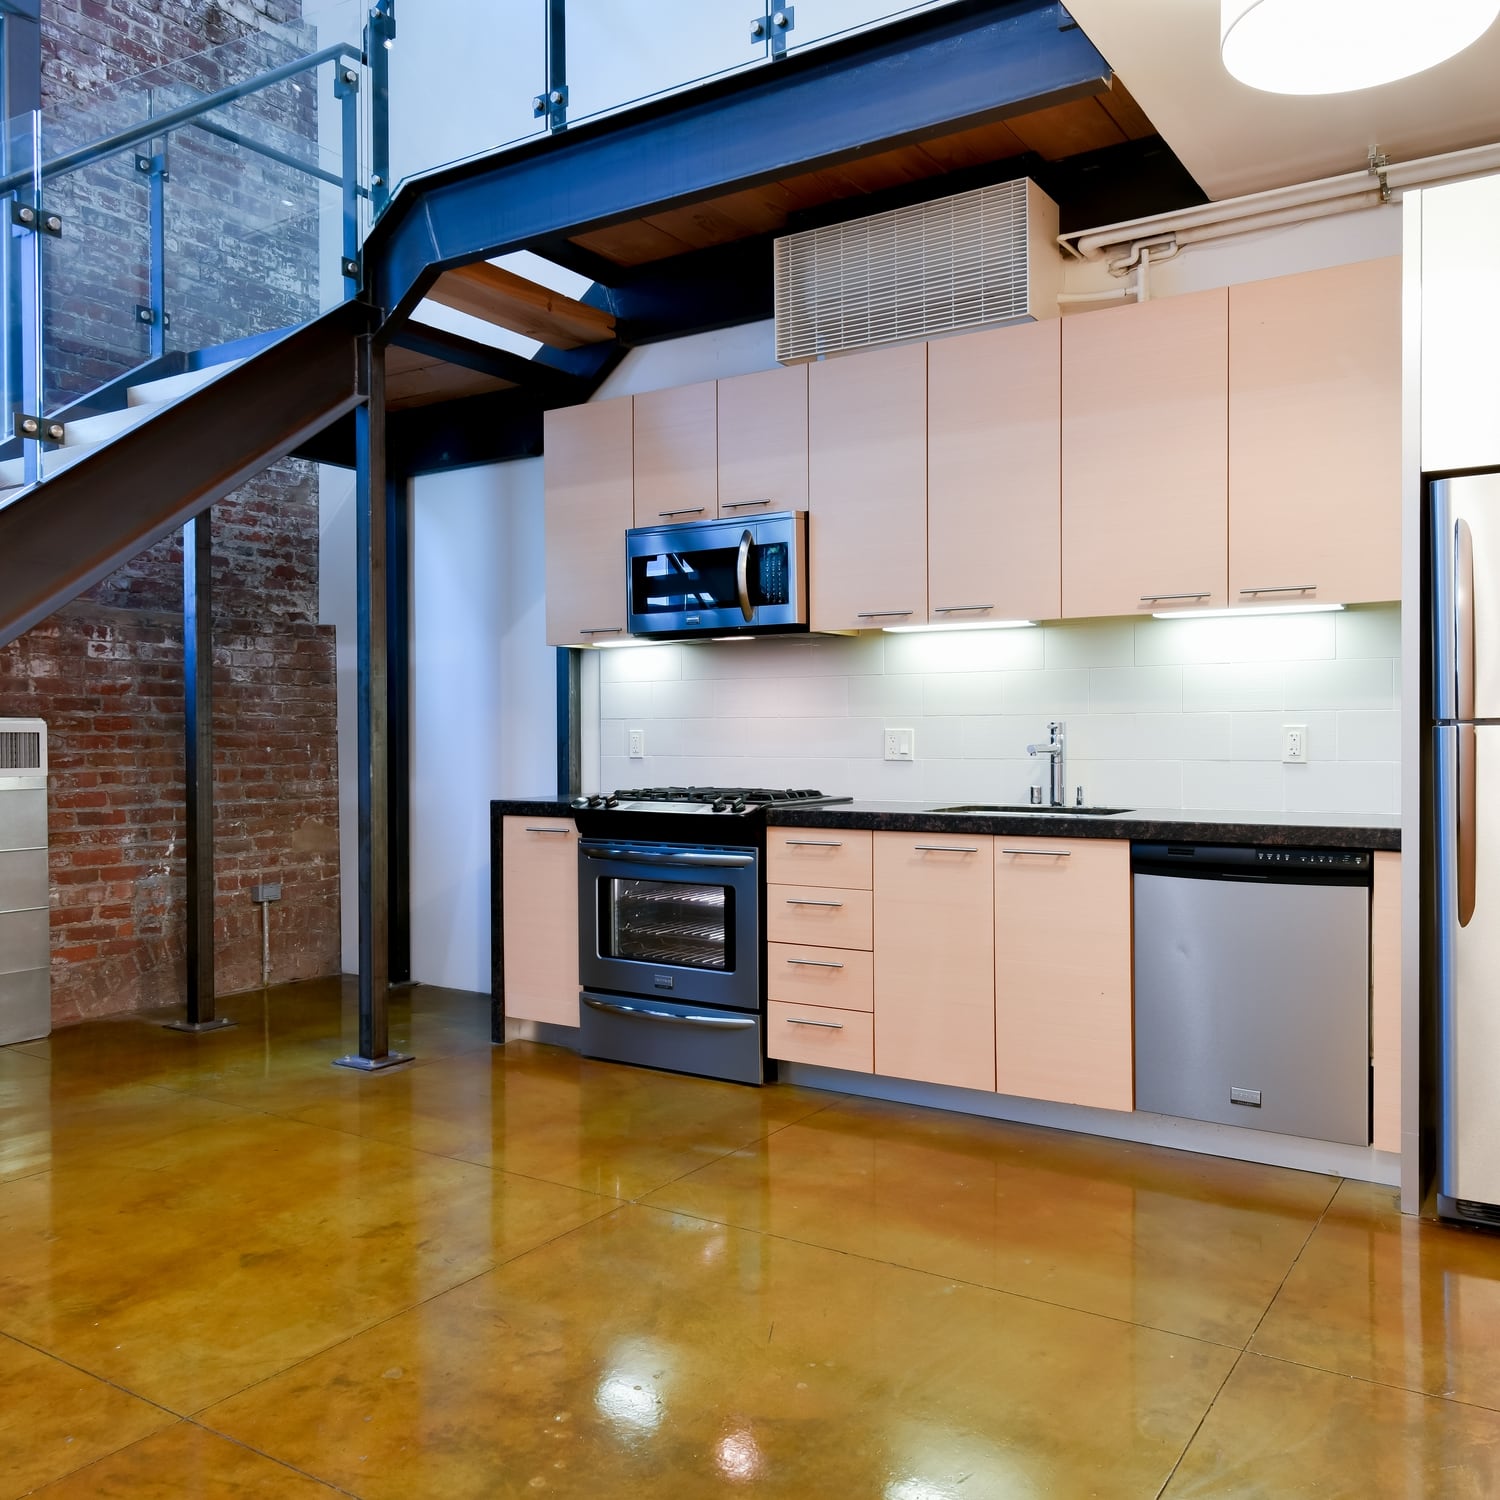 Apartments South Park-Industrial Style Kitchen With Modern Cabinets and Stainless Appliances